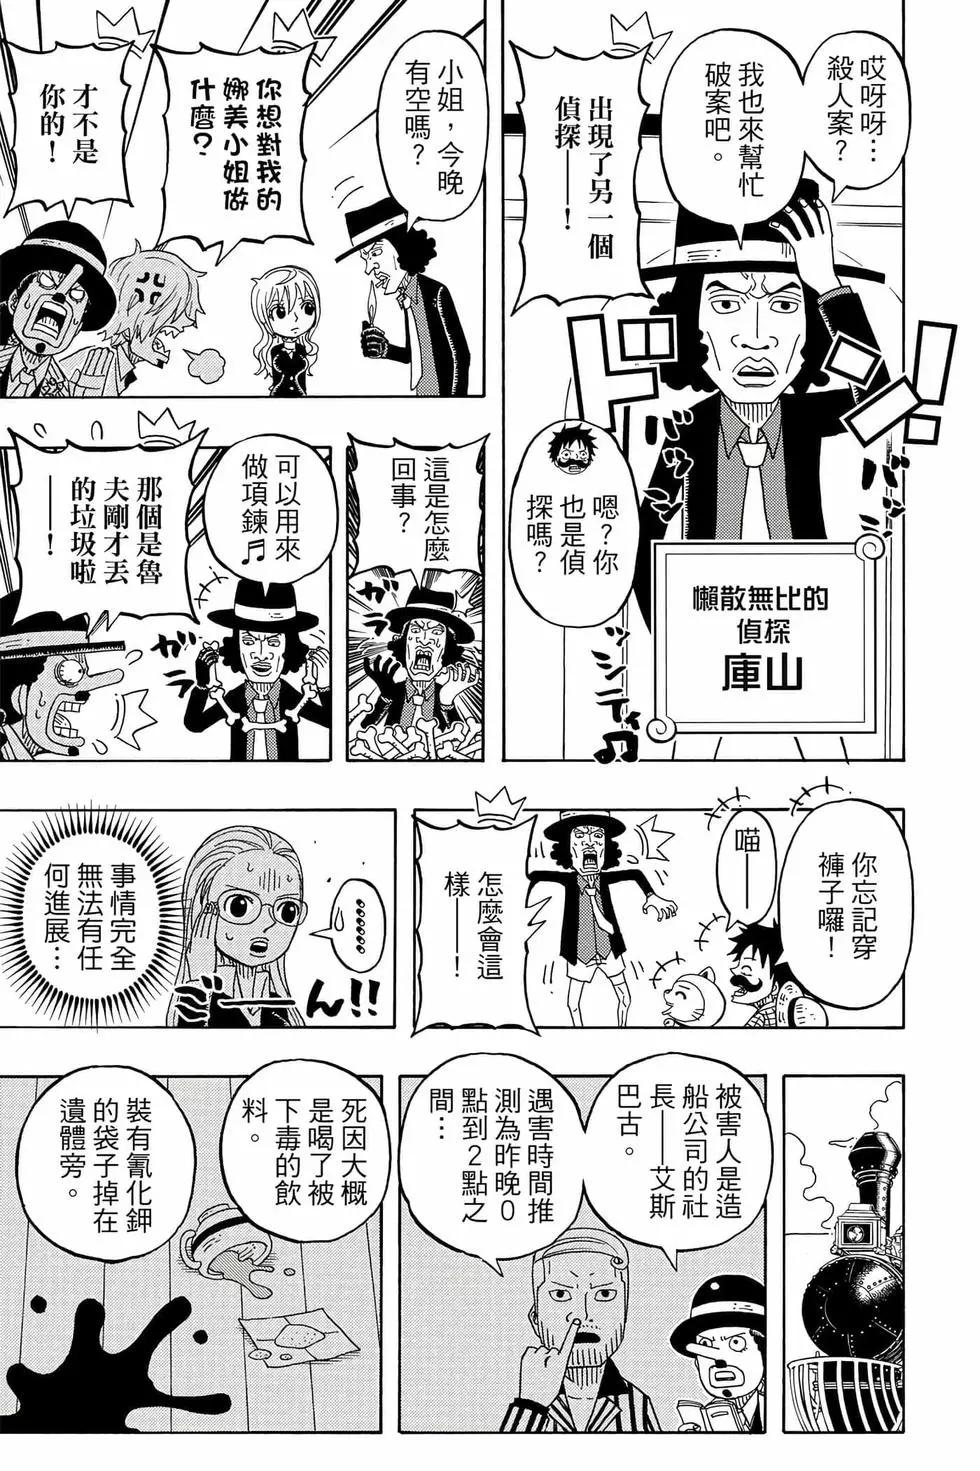 One piece party - 第05卷(1/4) - 8